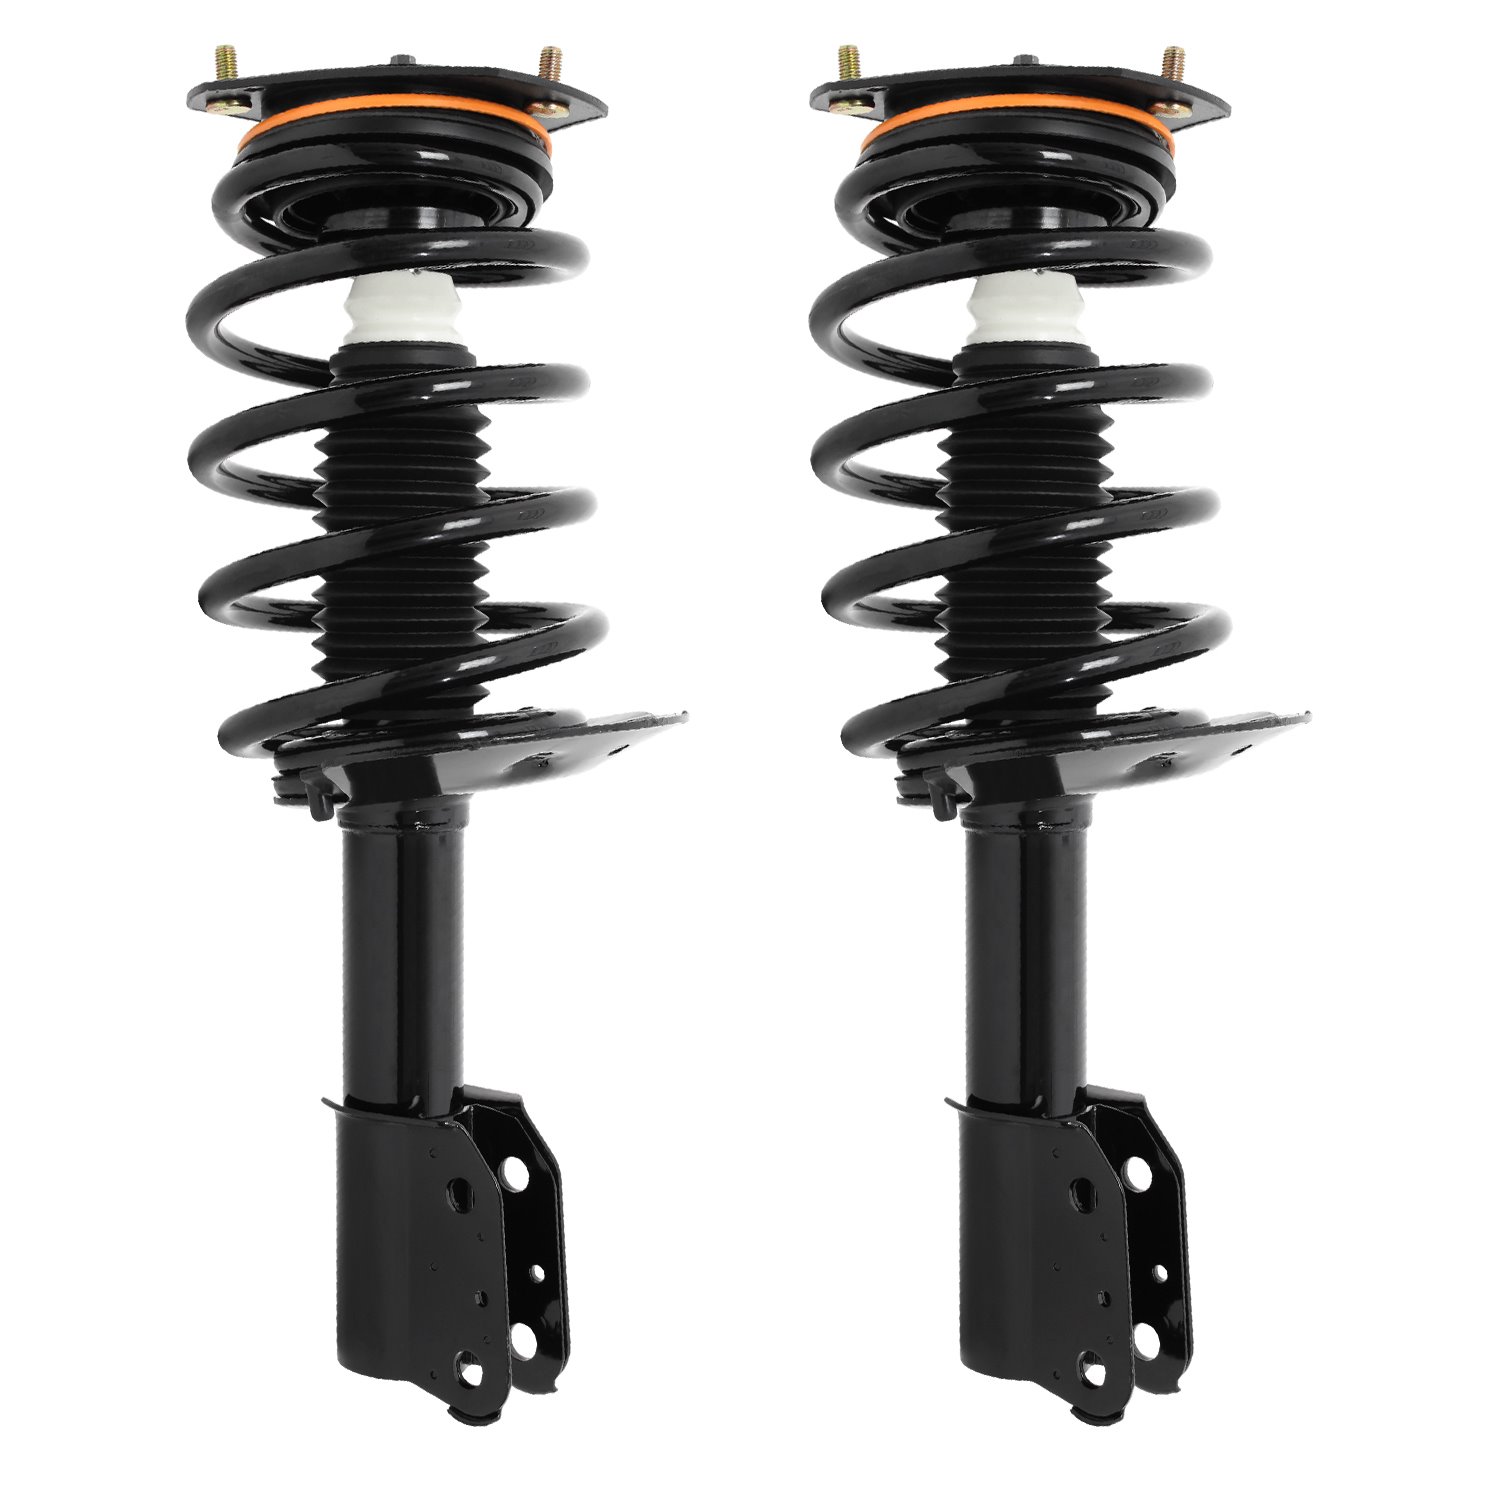 2-11440-001 Suspension Strut & Coil Spring Assembly Set Fits Select Buick Terraza, Chevy Uplander, Pontiac Montana, Saturn Relay